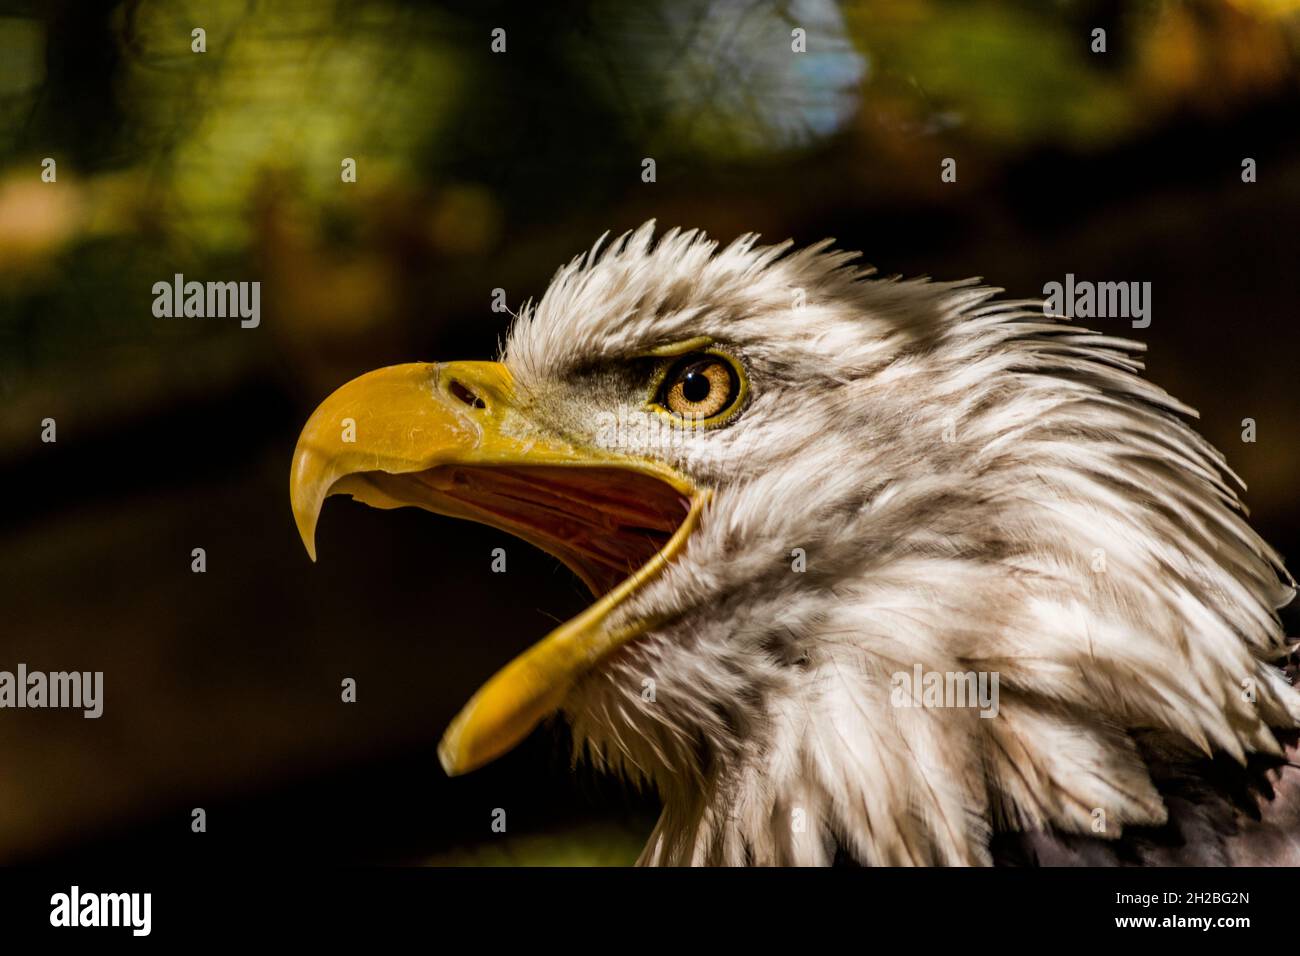 Screaming eagle with open mouth close-up. Stock Photo